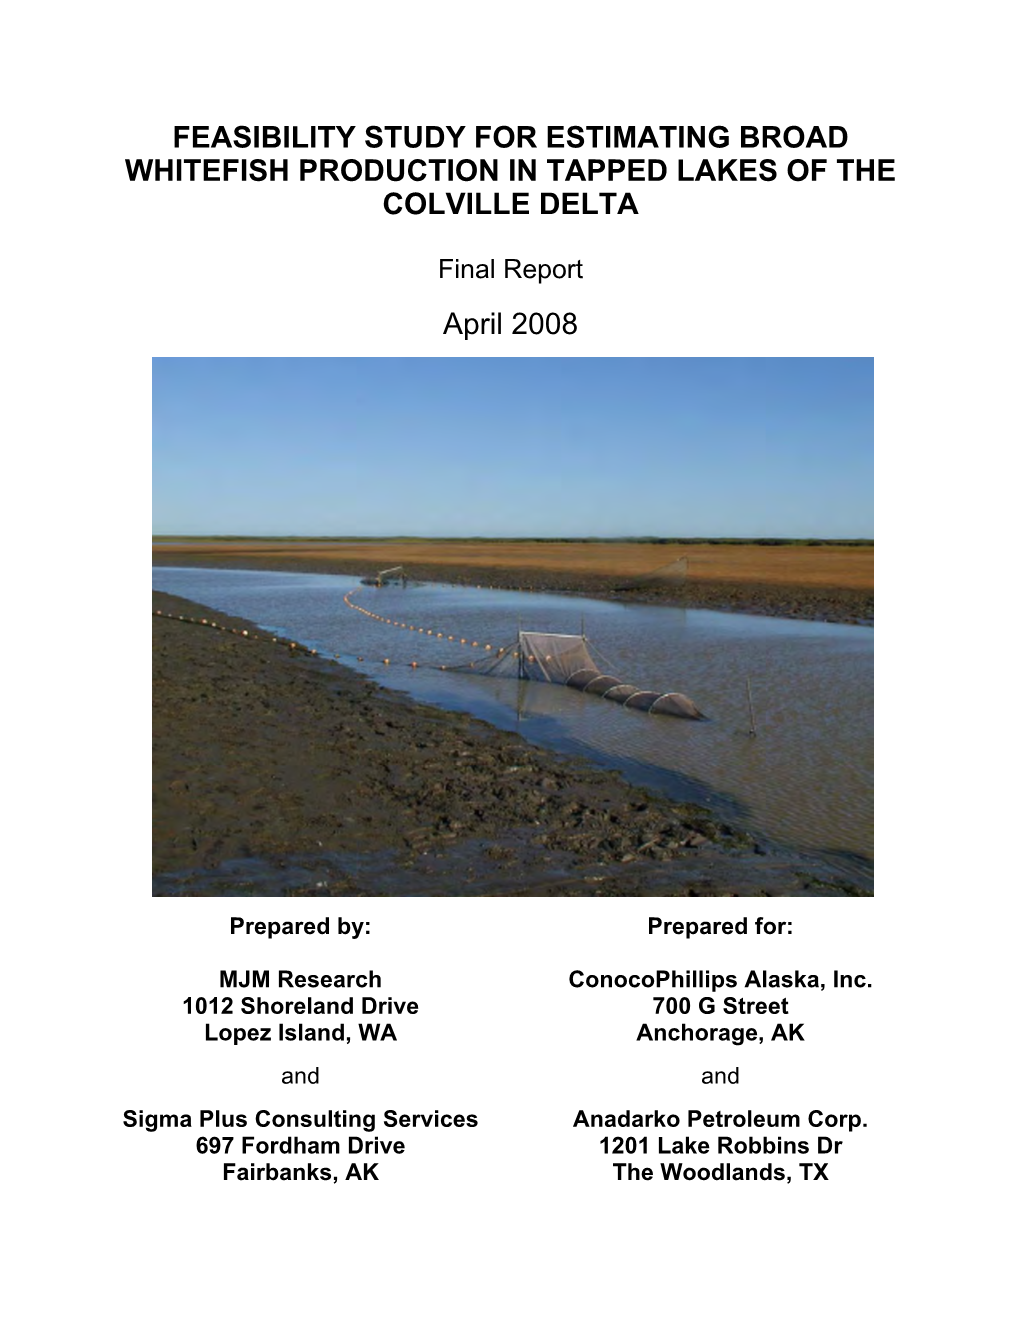 Feasibility Study for Estimating Broad Whitefish Production in Tapped Lakes of the Colville Delta